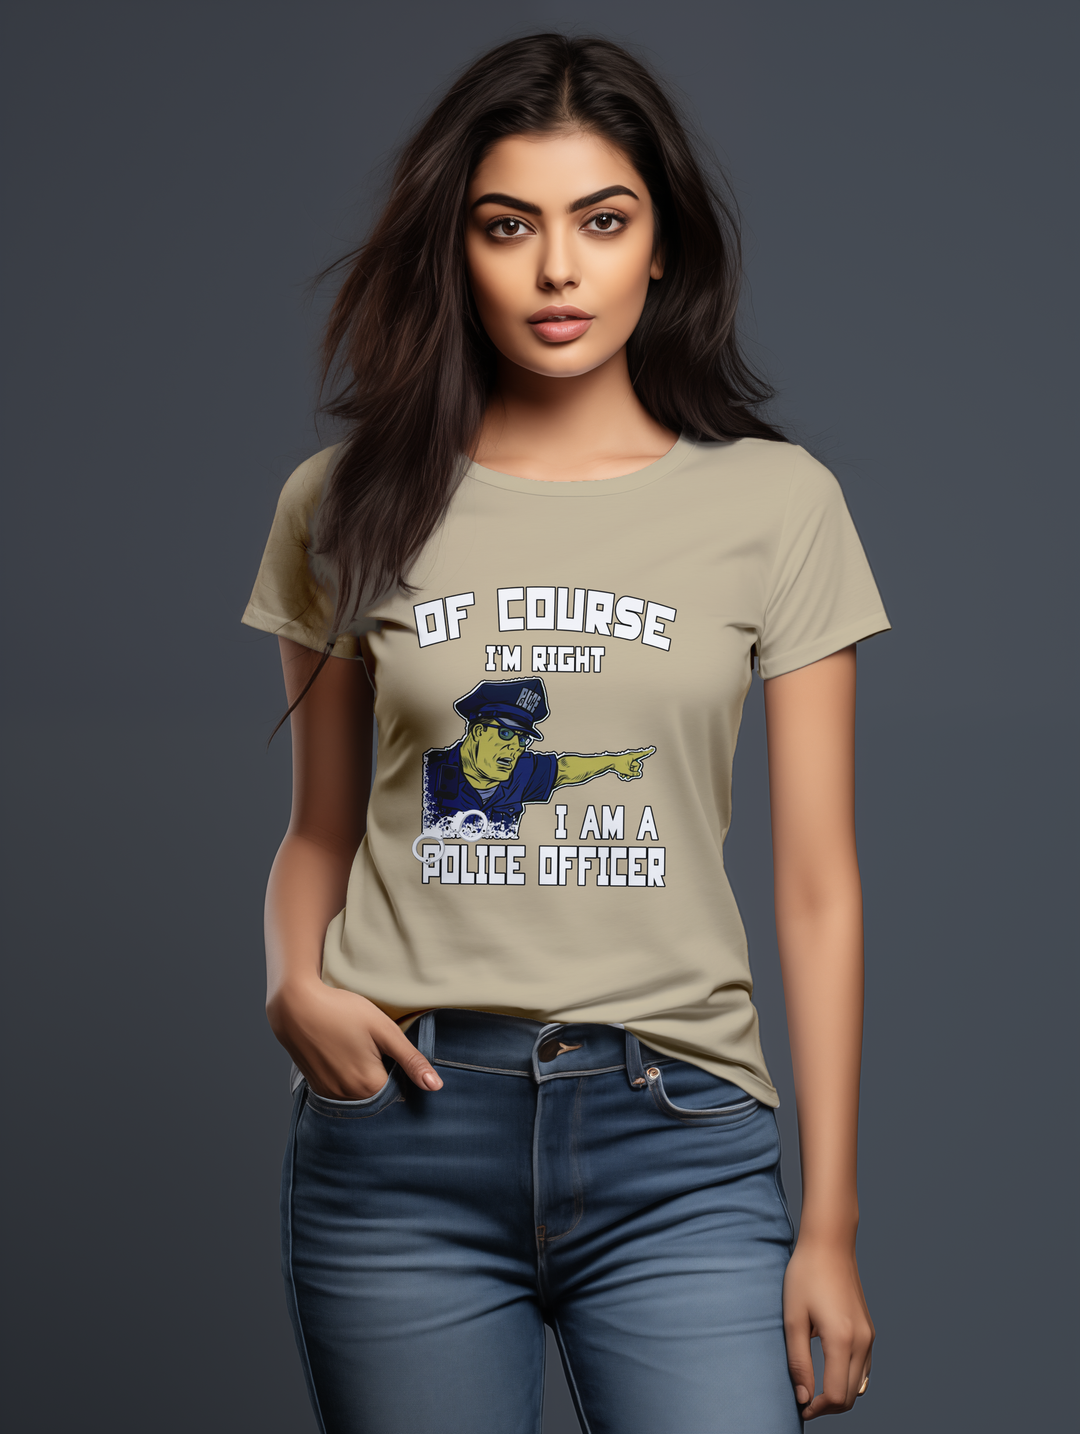 Womens Beige OfCourse I'm a Police Officer tee